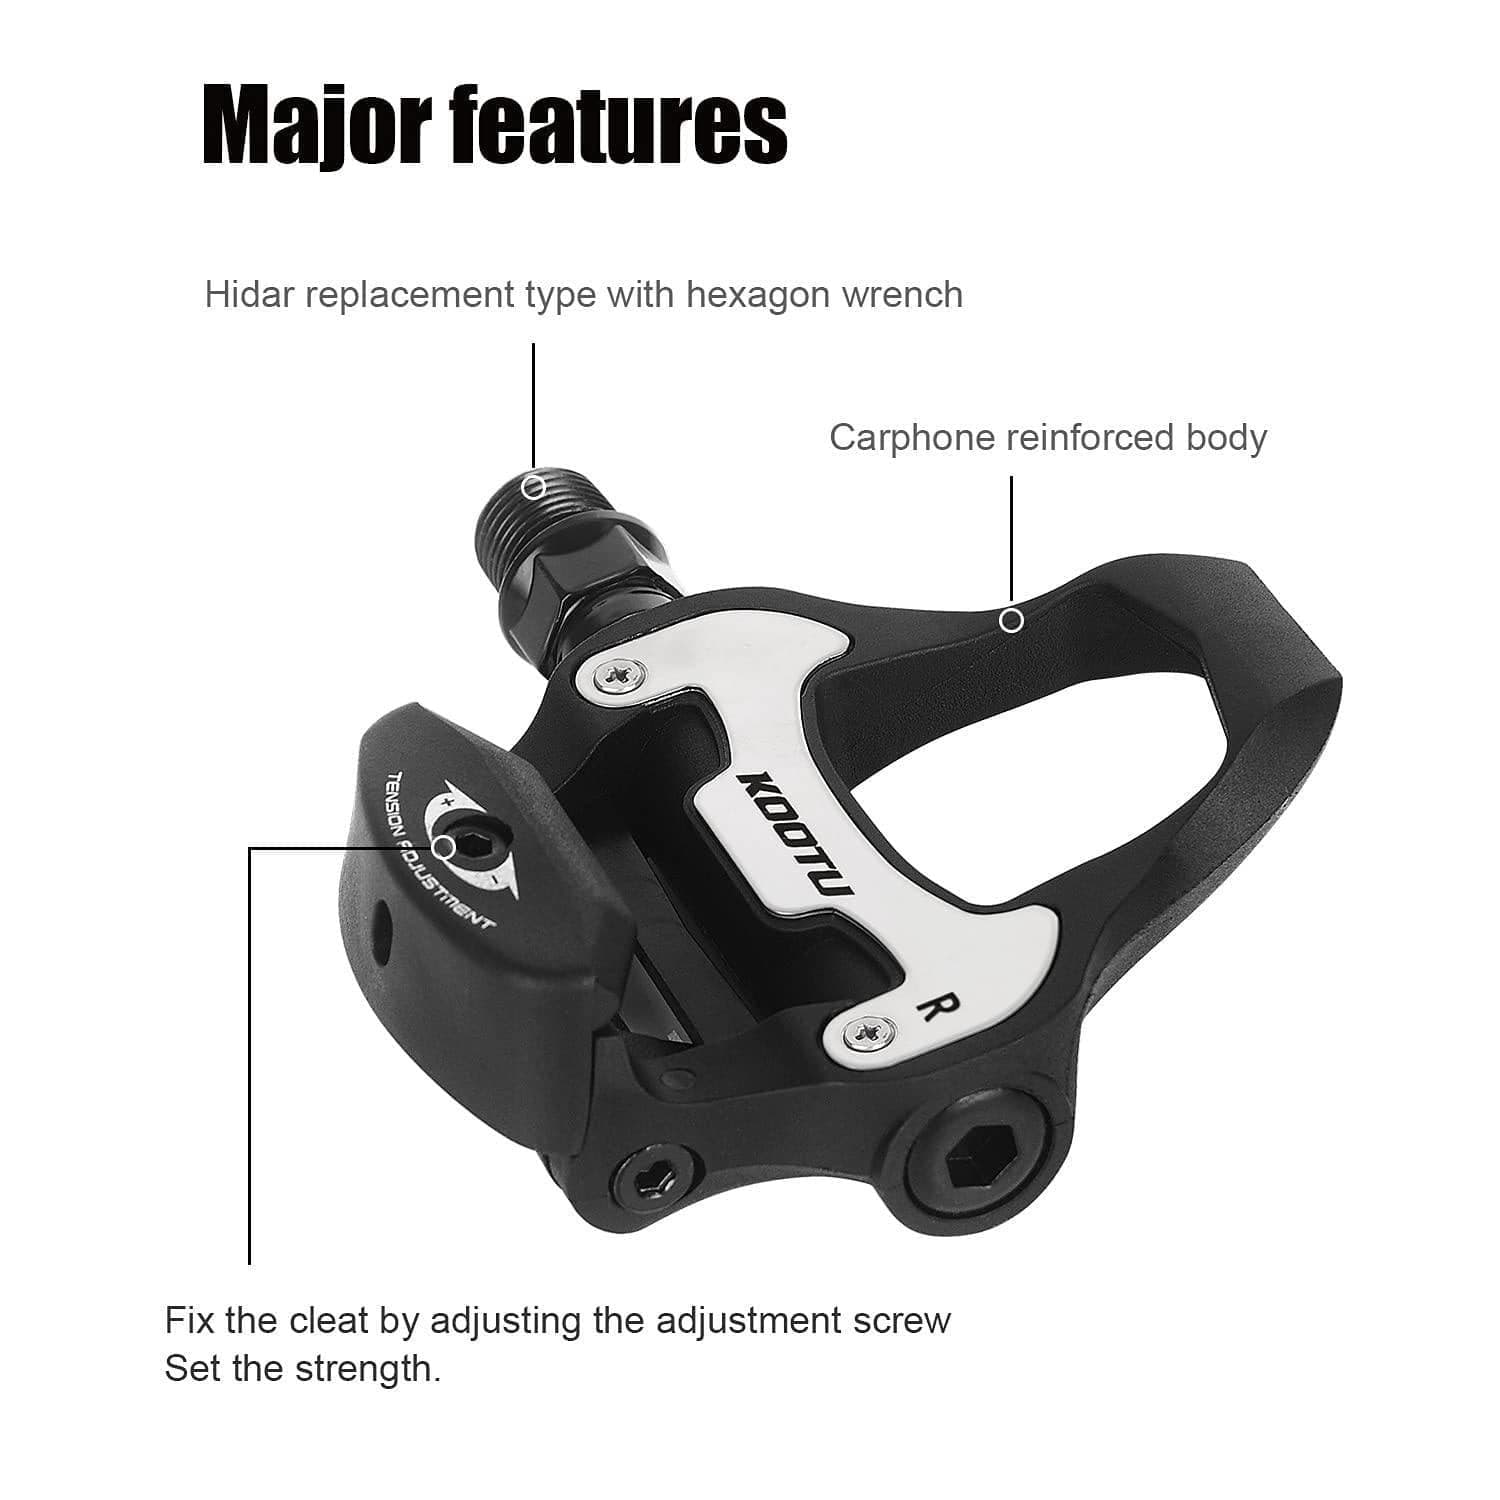 SPD SL Pedals for SHIMANO SPD System Clipless Pedal Bike Bicyle Lock Pedal - KOOTUBIKE